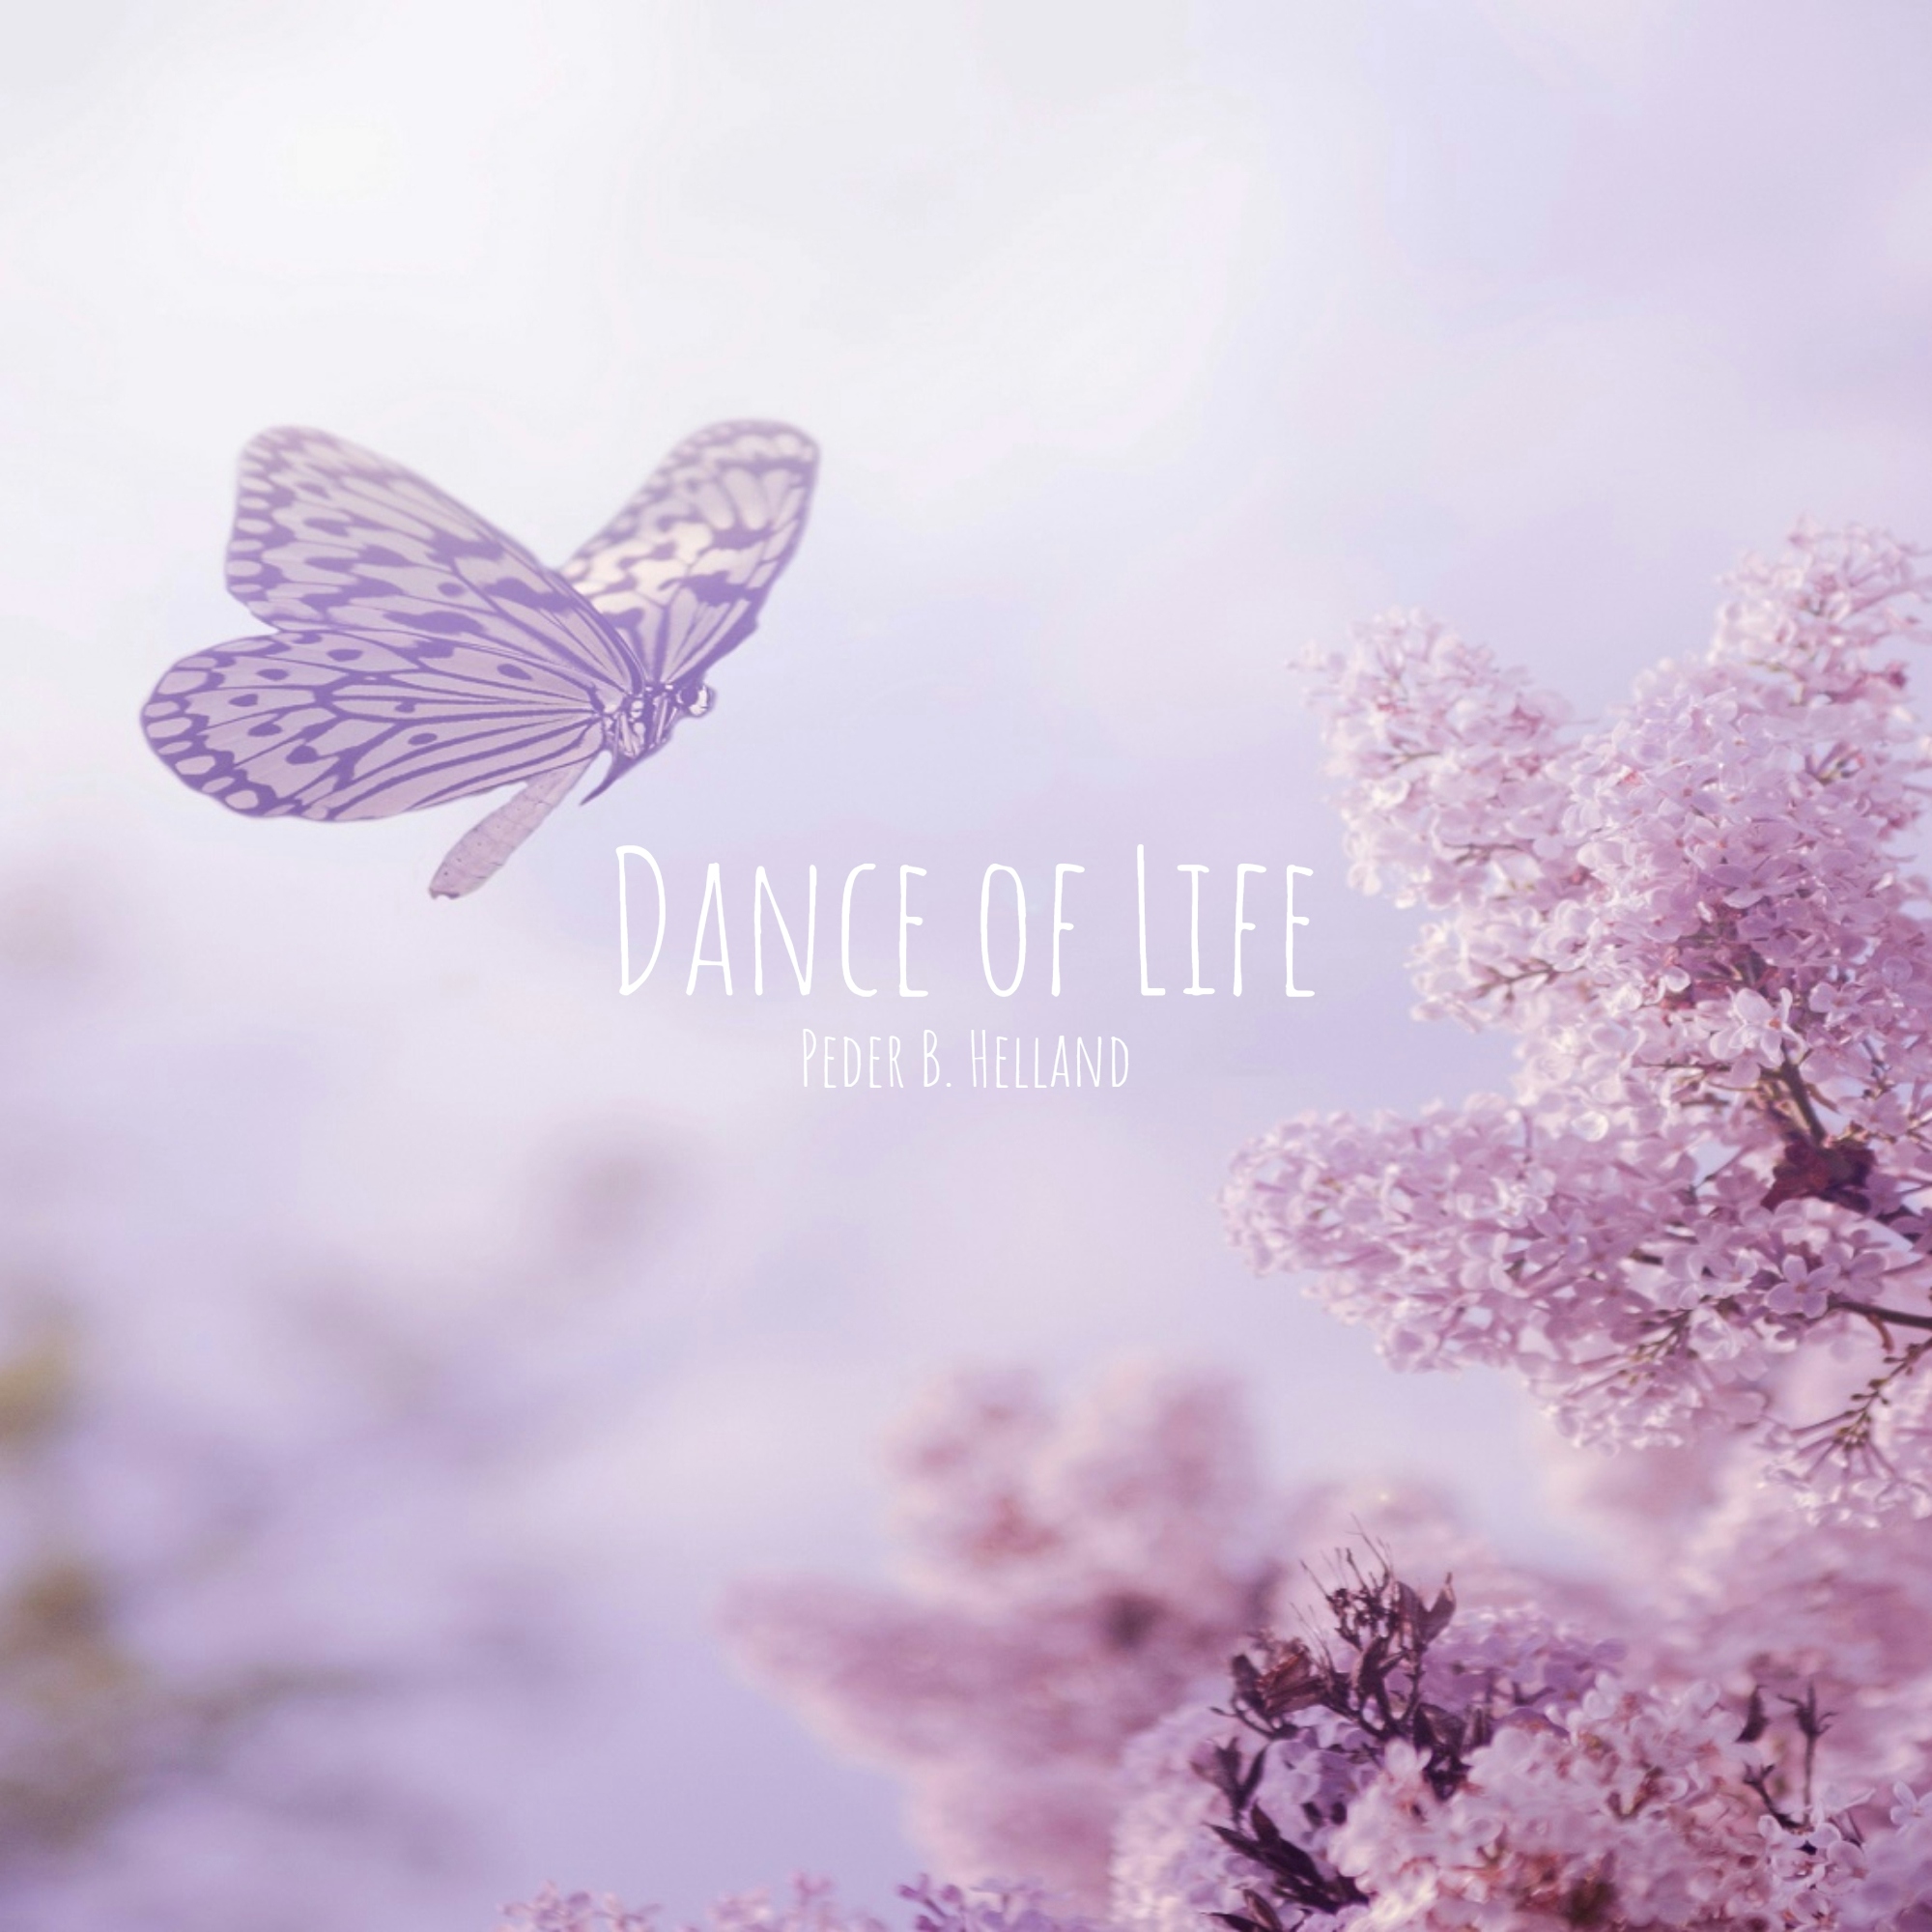 Cover art for the album Dance of Life by Peder B. Helland